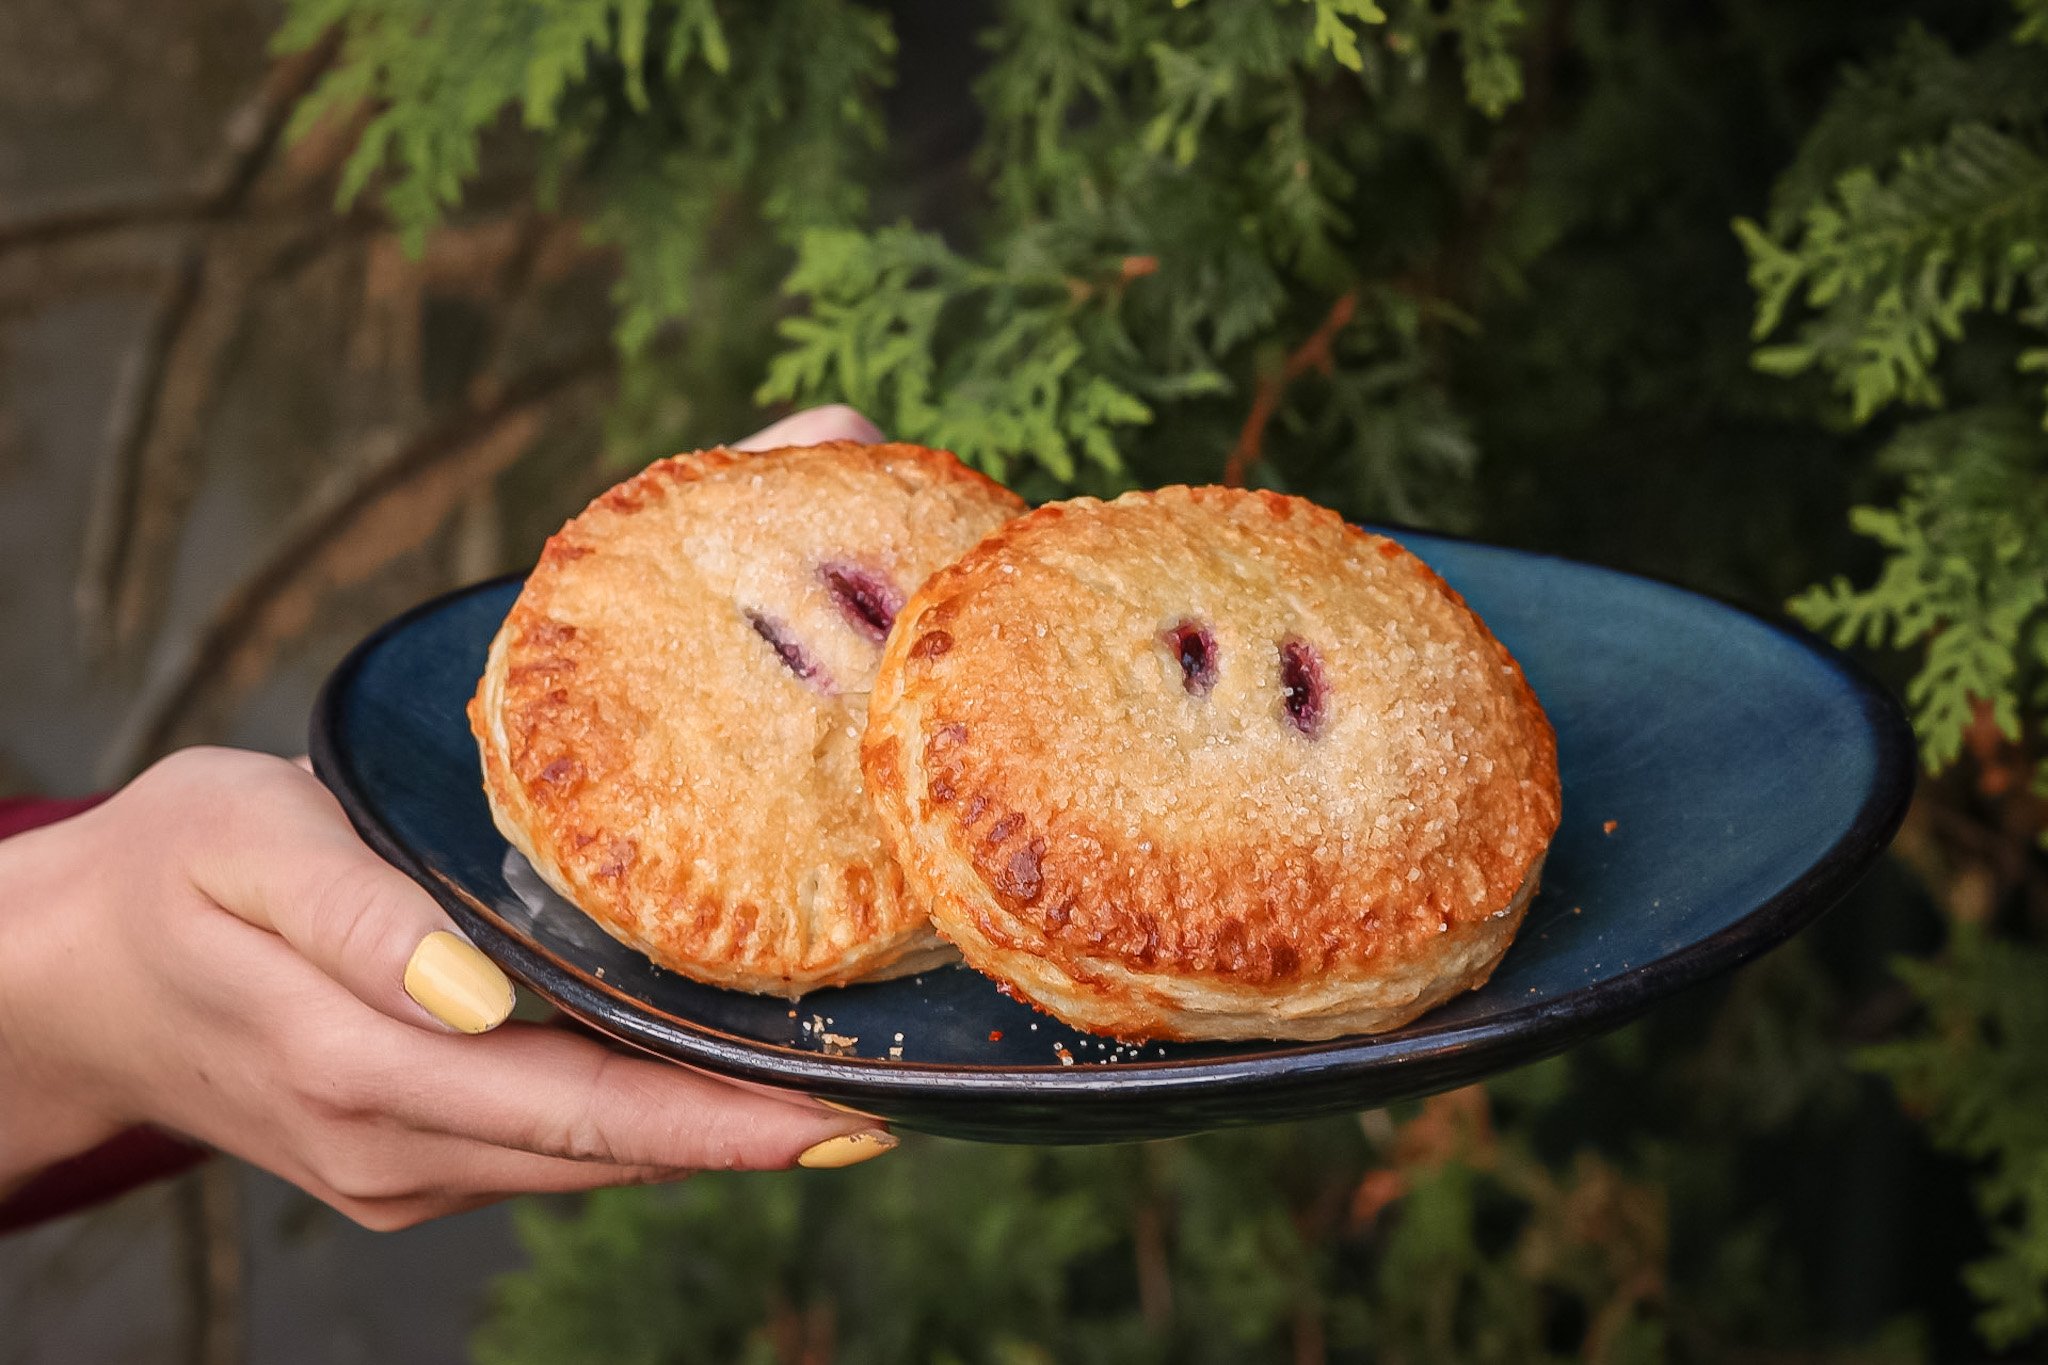 This week's weekend pastry is a good one. We will be featuring Blackberry Peach Hand Pies! 🍑

A buttery, flaky crust houses a blackberry peach-flavored filling, and it is dusted with cinnamon sugar to polish it off! It's springy, fruity, tart yet sw